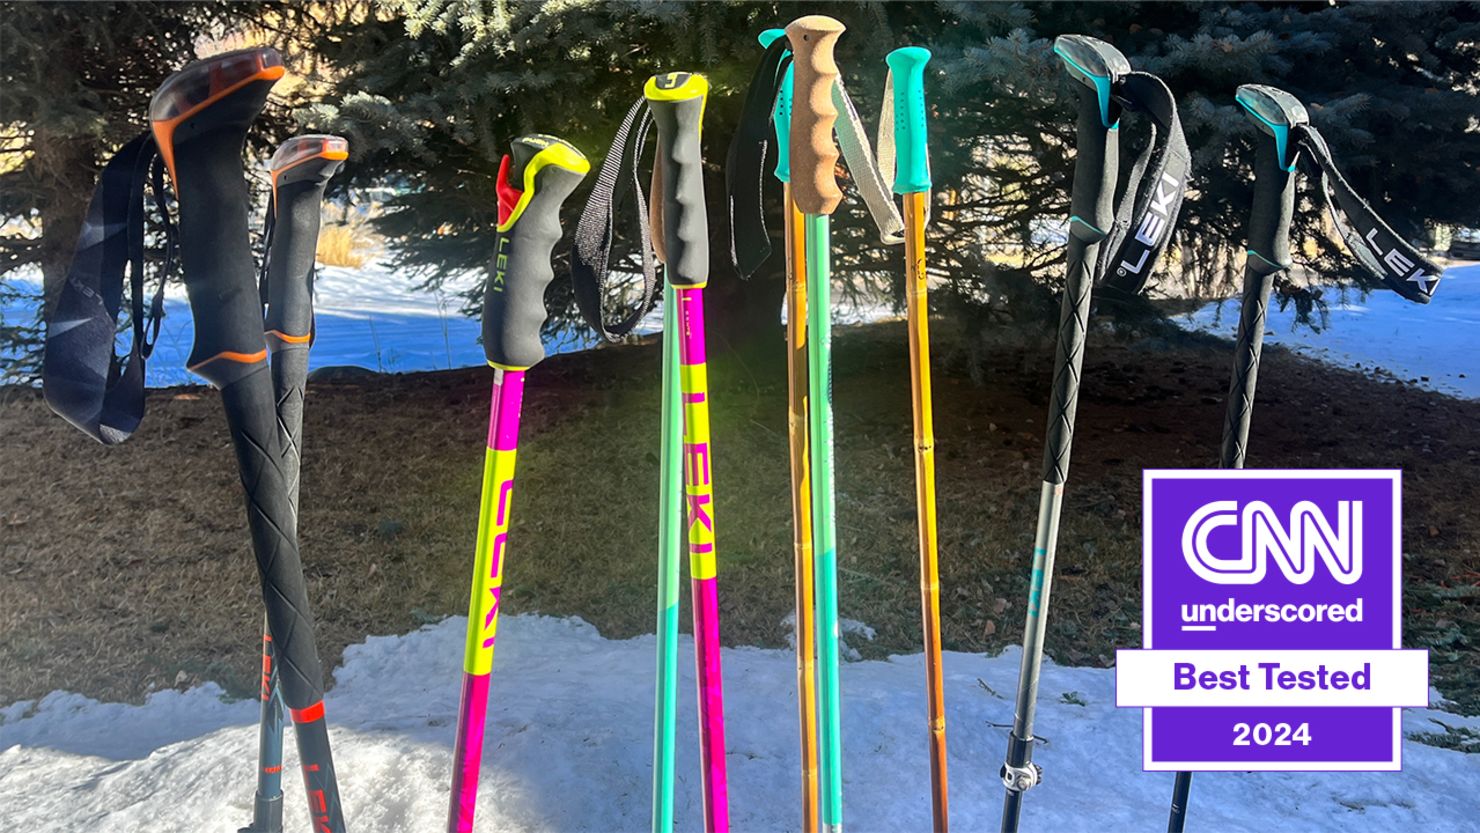 The Best Time to Buy New Ski Equipment